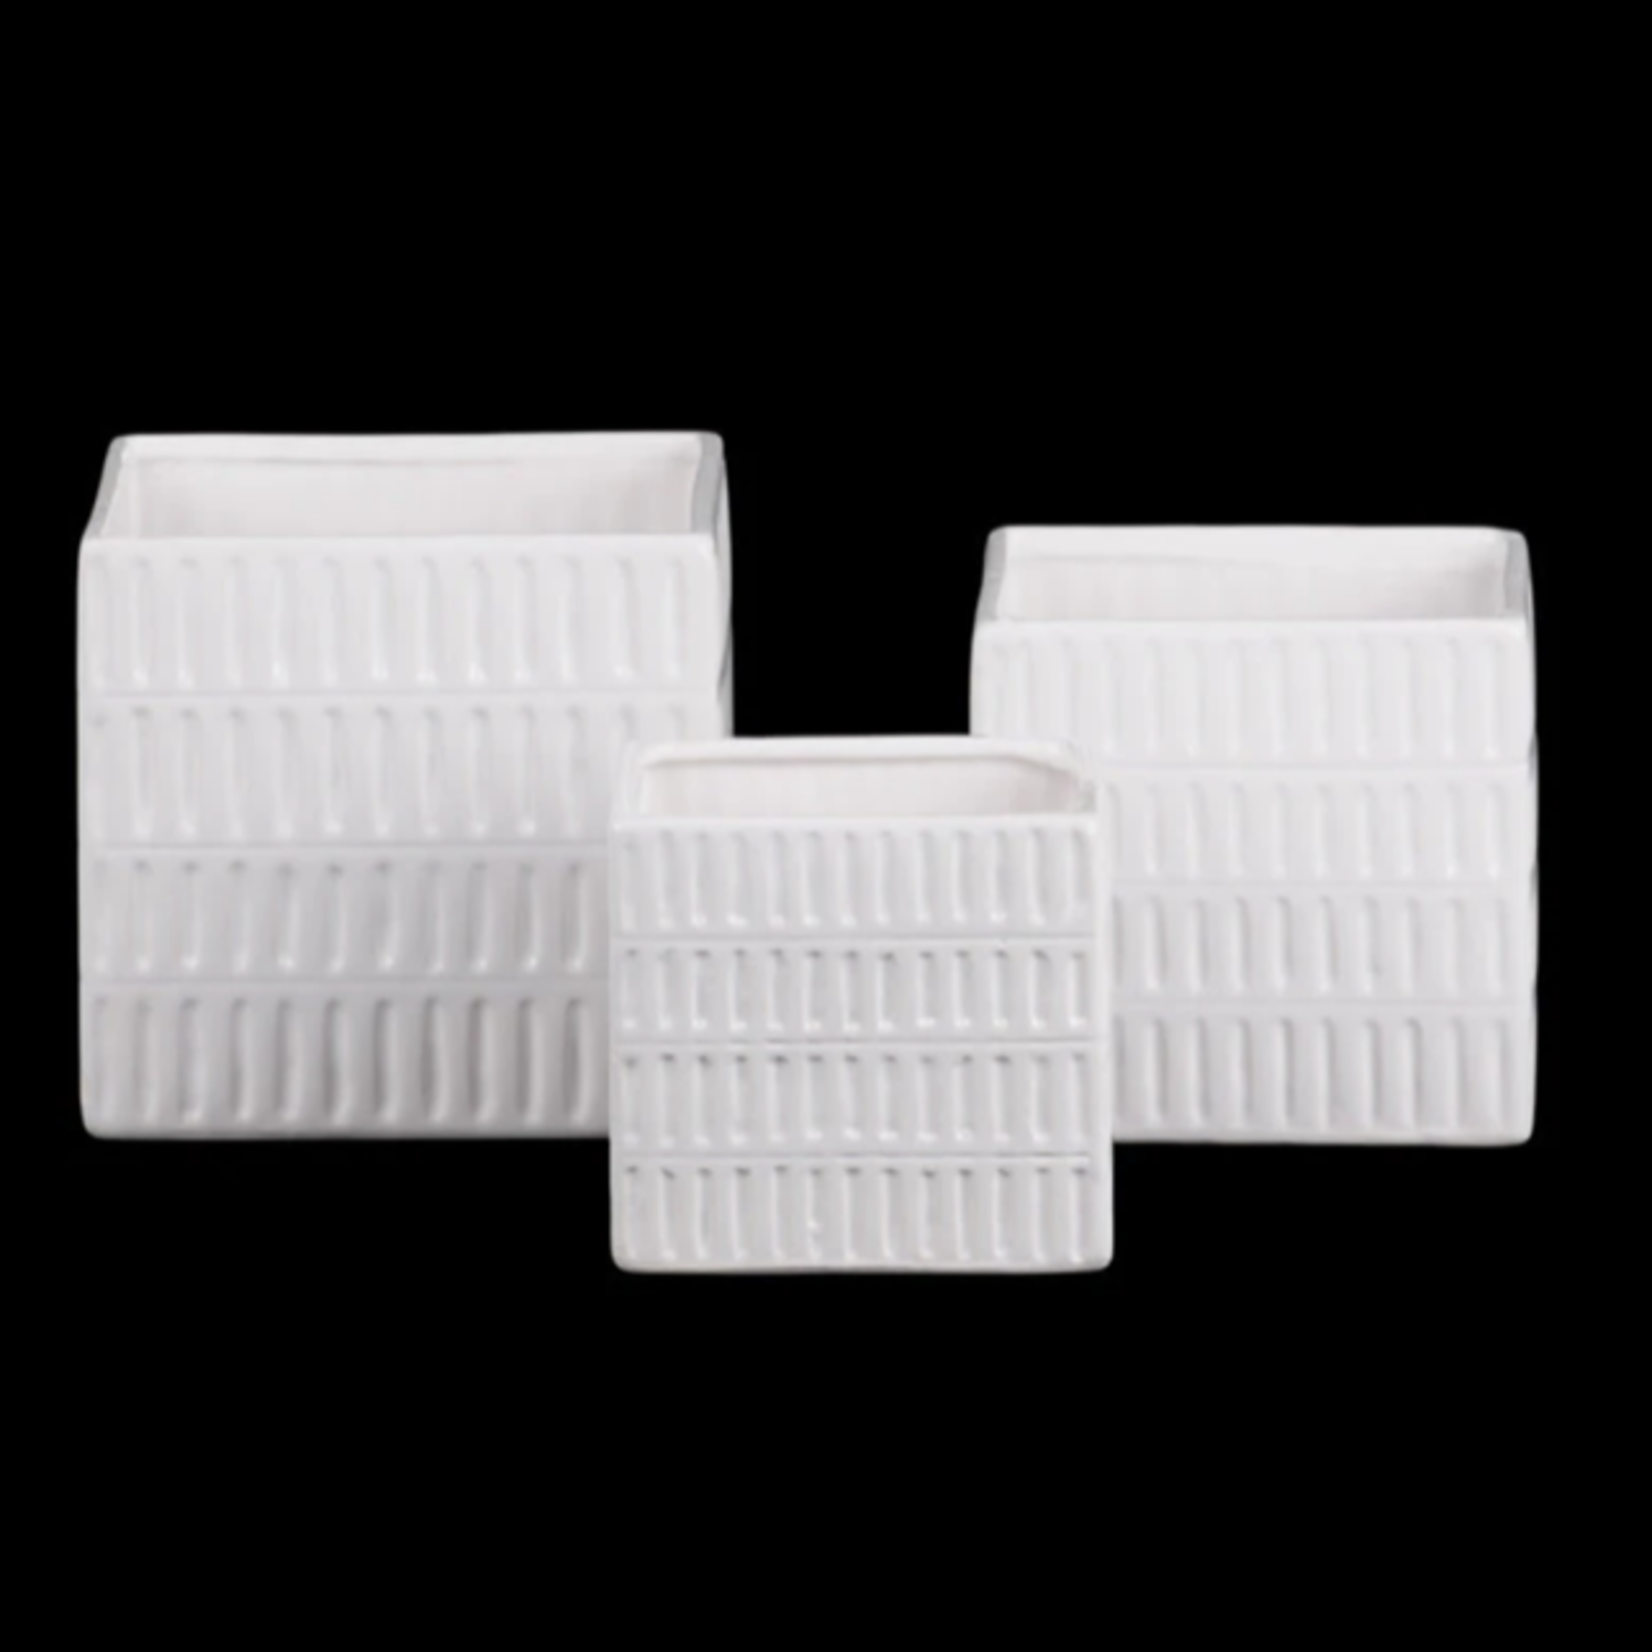 4.25”H X 4.5” X 4.5” SMALL WHITE Ceramic Square Pot with 4 Tier Embossed Oblong Lattice Design Body and Tapered Bottom